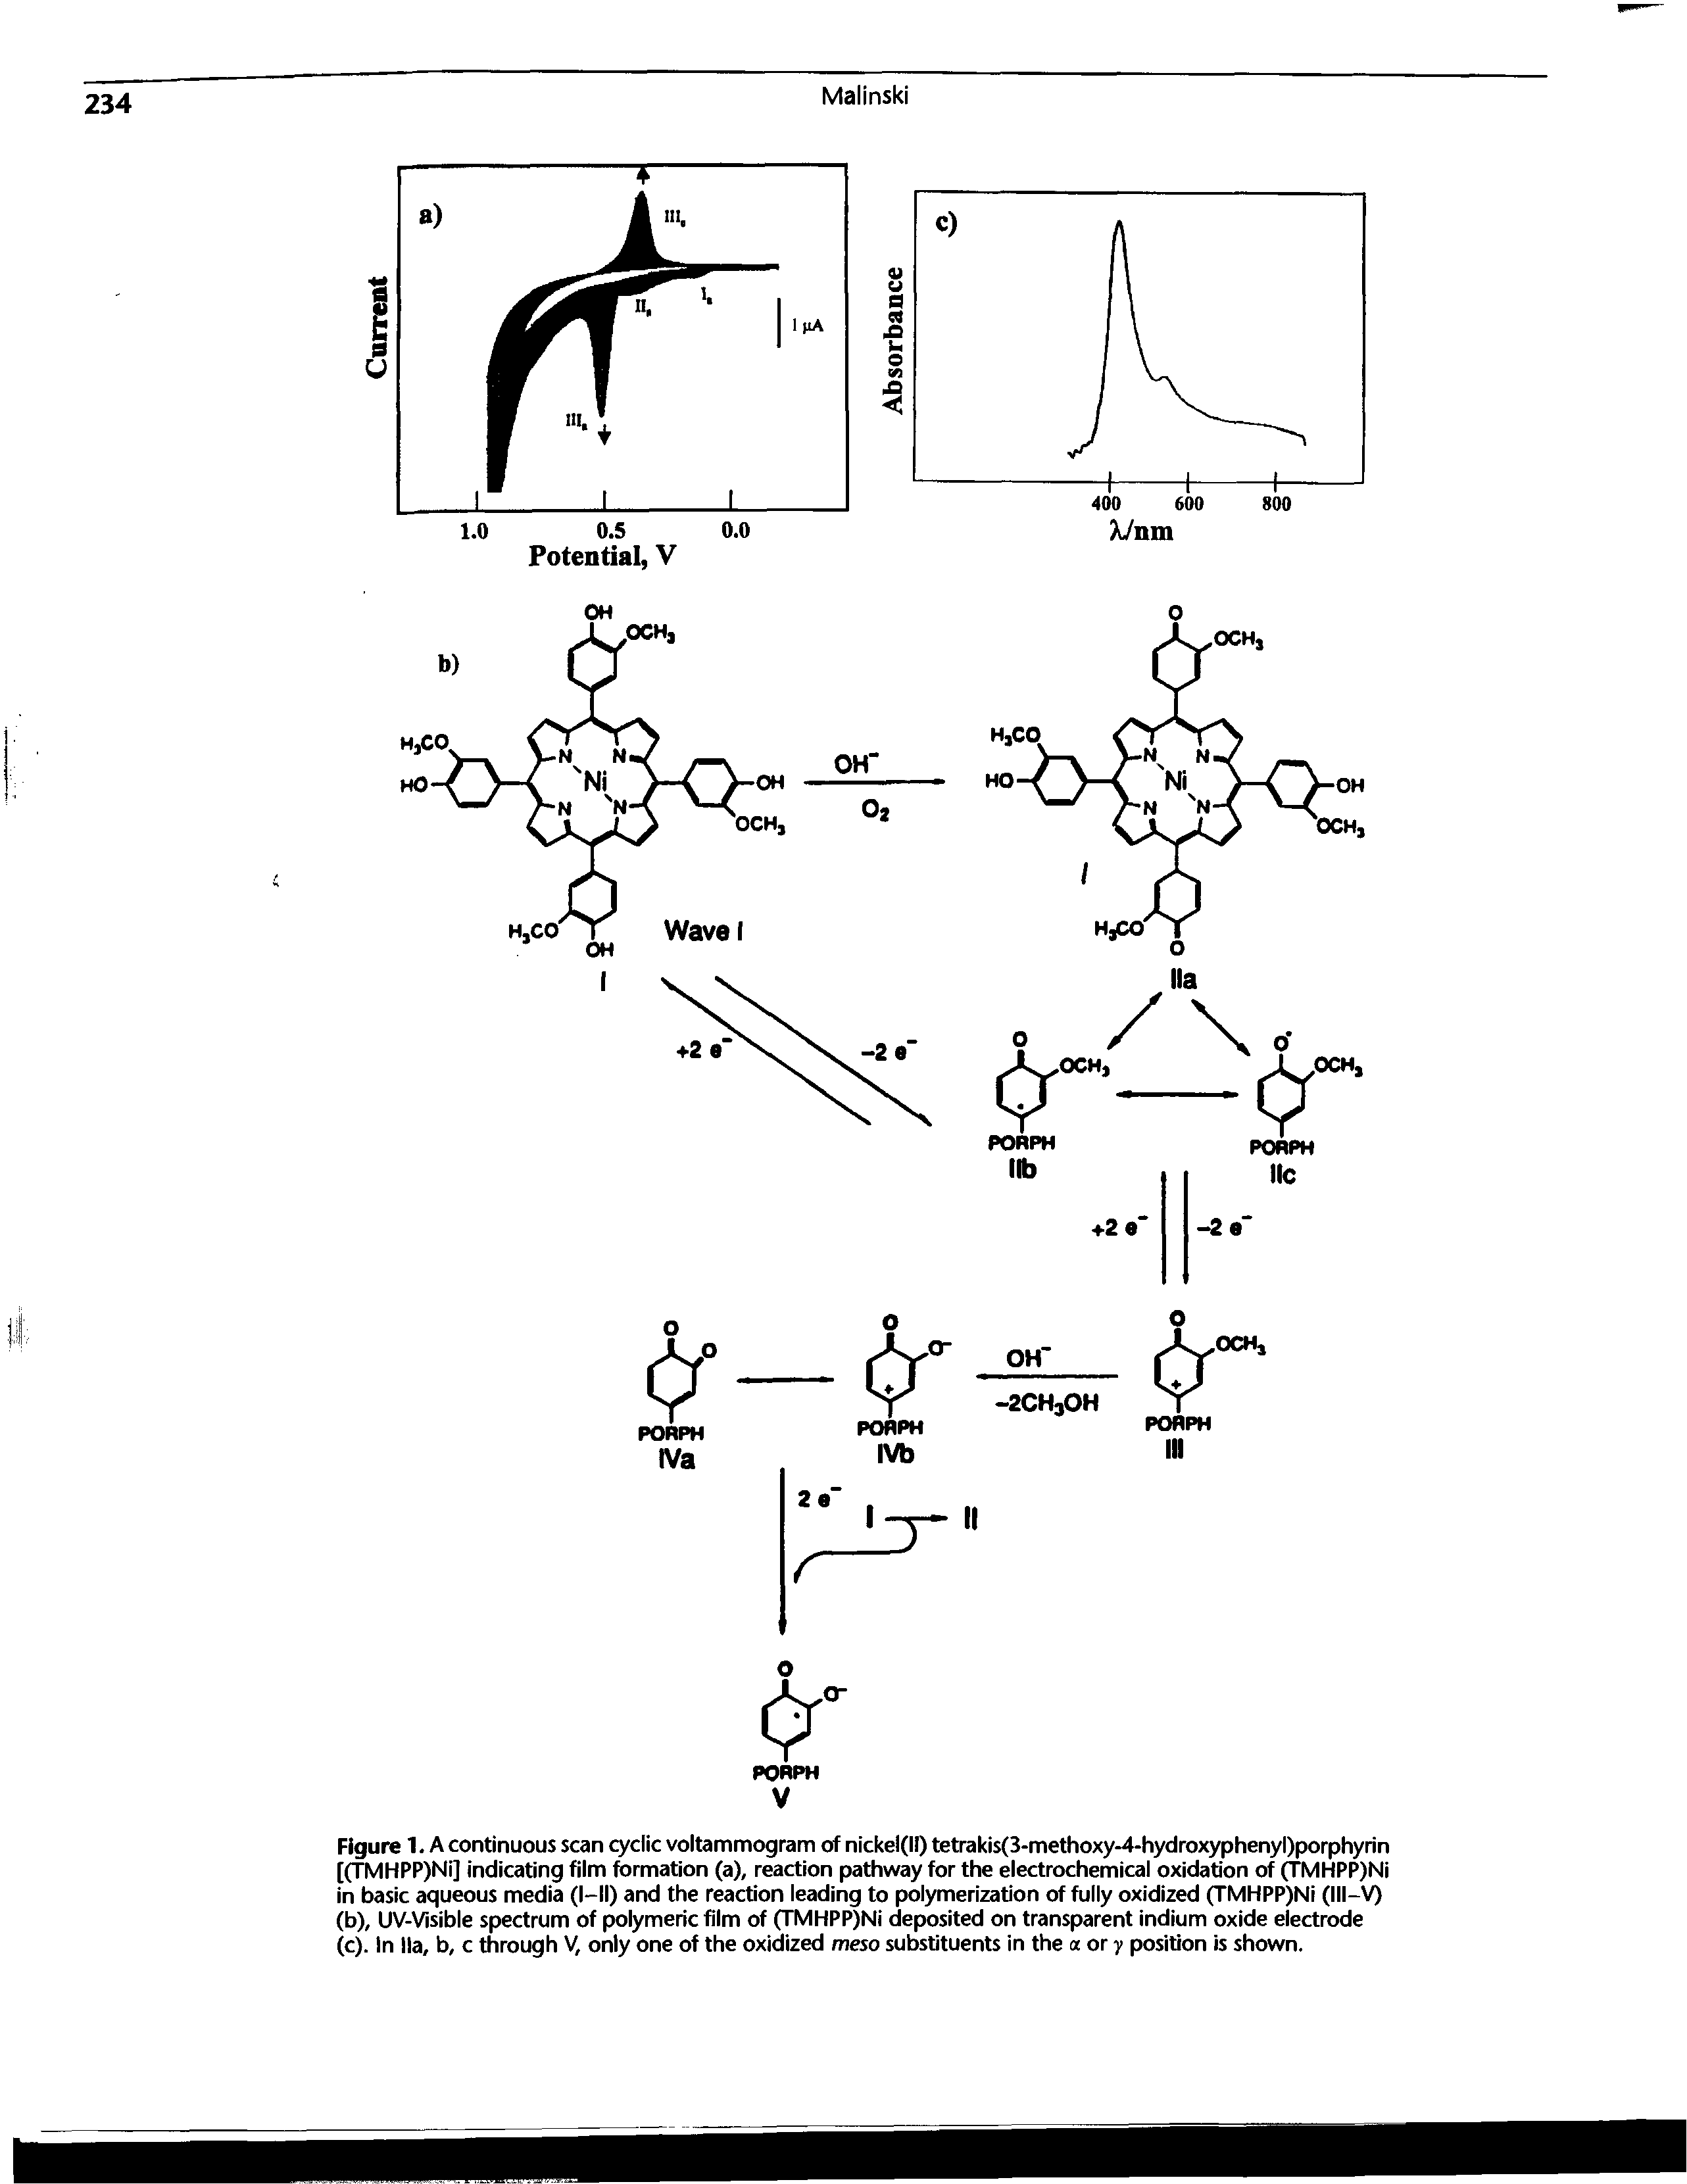 Figure 1. A continuous scan cyclic voltammogram of nickel(II) tetrakis(3-methoxy-4-hydroxyphenyl)porphyrin [(TMHPP)Ni] indicating film formation (a), reaction pathway for the electrochemical oxidation of MHPP)Ni in basic aqueous media (l-ll) and the reaction leading to polymerization of fully oxidized (TMHPP)Ni (lll-V)...